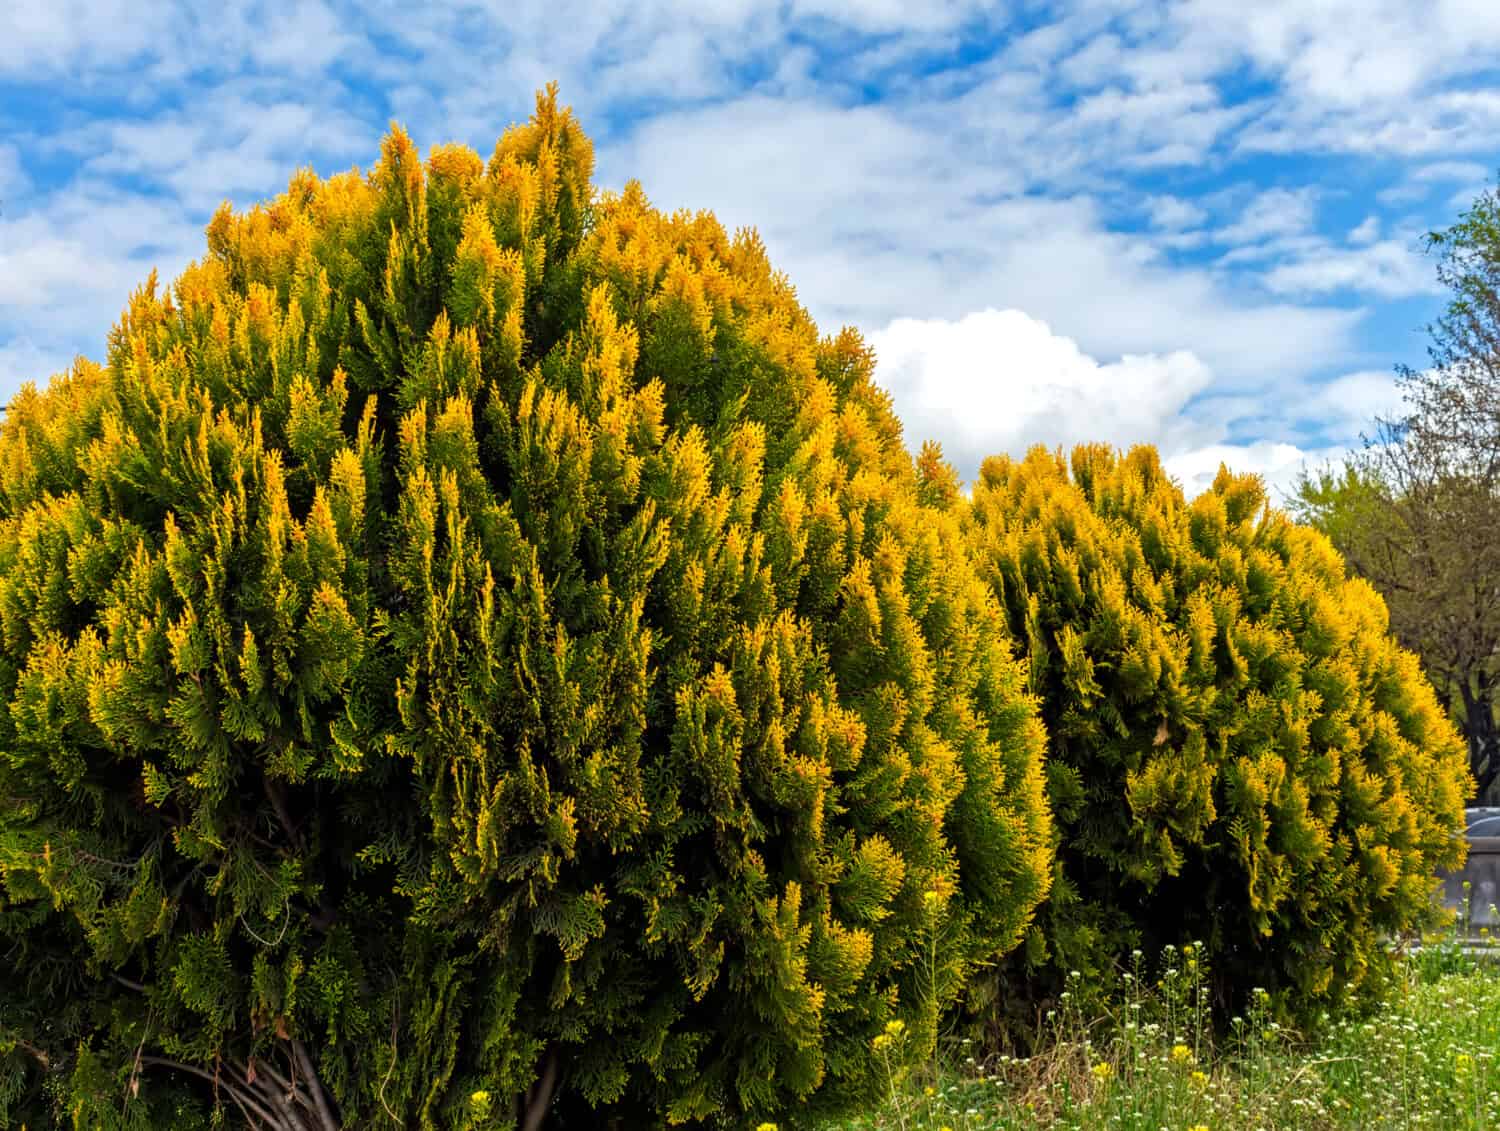 Thuja western 'Golden Globe' against the background of blue sky with clouds.